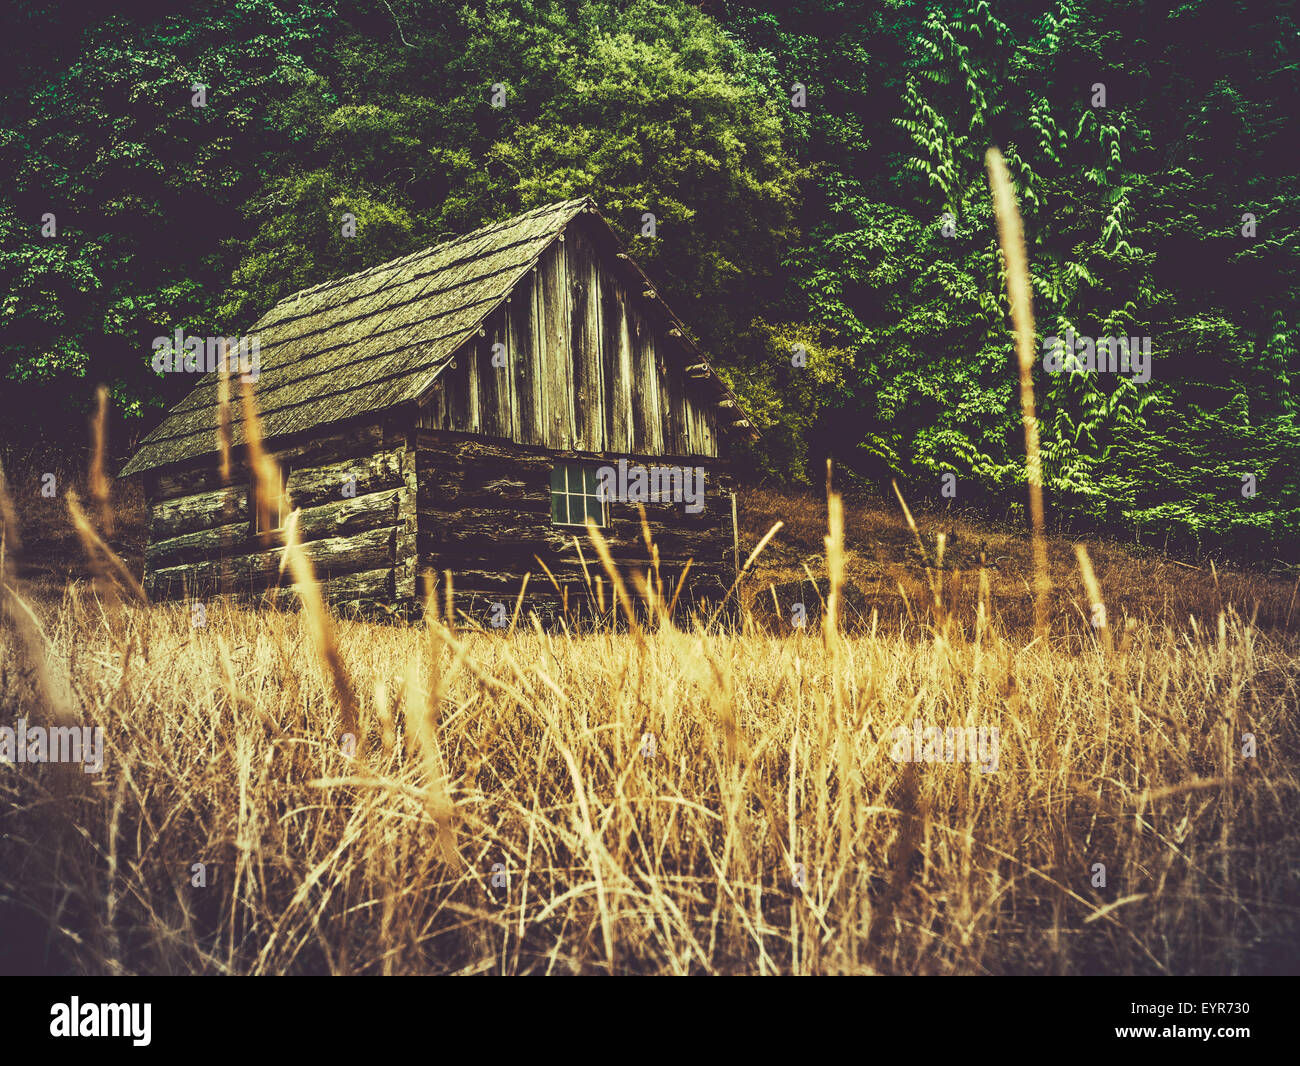 Rustic Old Farm Building Or Barn In A Field Of Grass Stock Photo